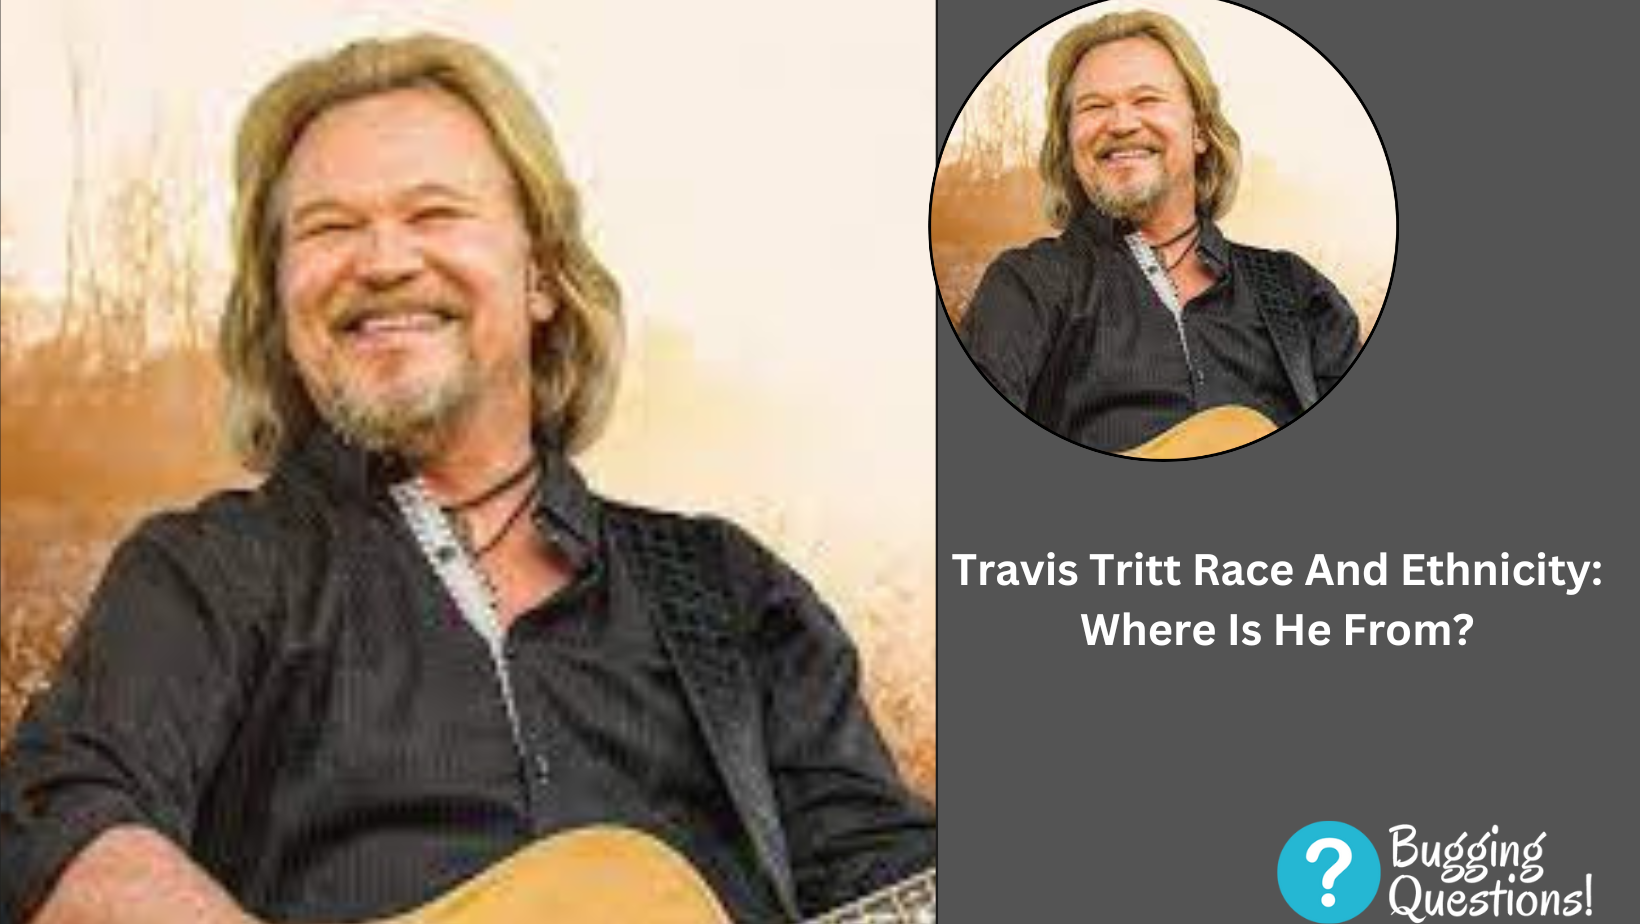 Travis Tritt Race And Ethnicity: Where Is He From?